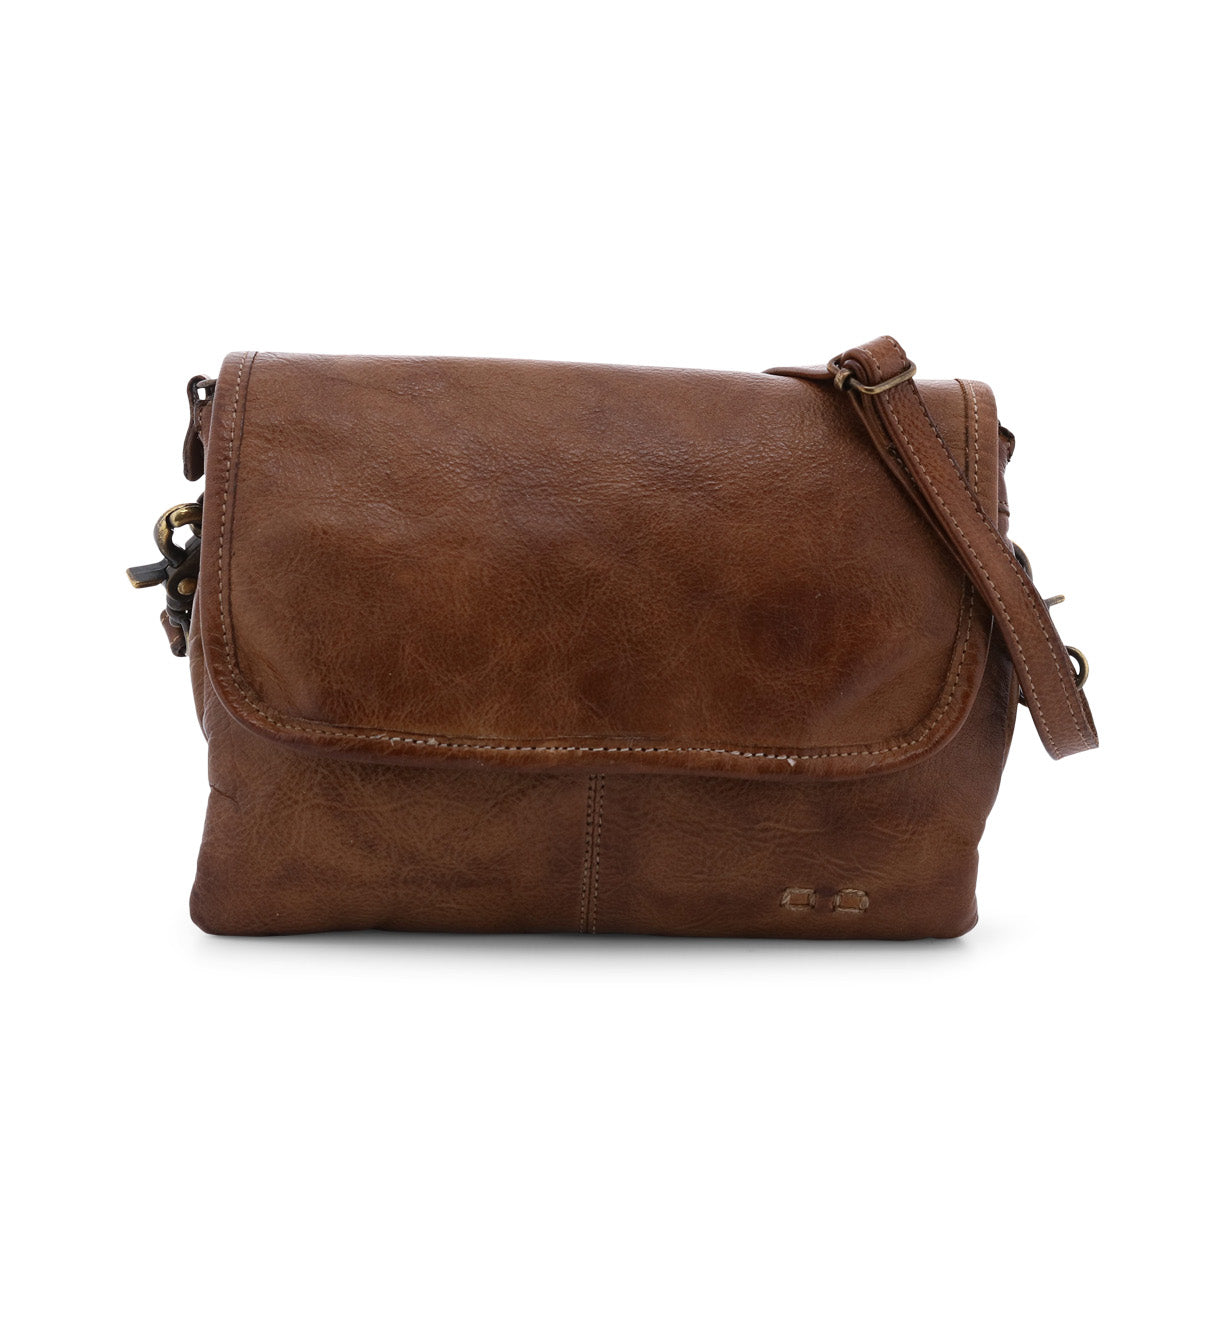 A Ziggy by Bed Stu brown leather cross body bag.